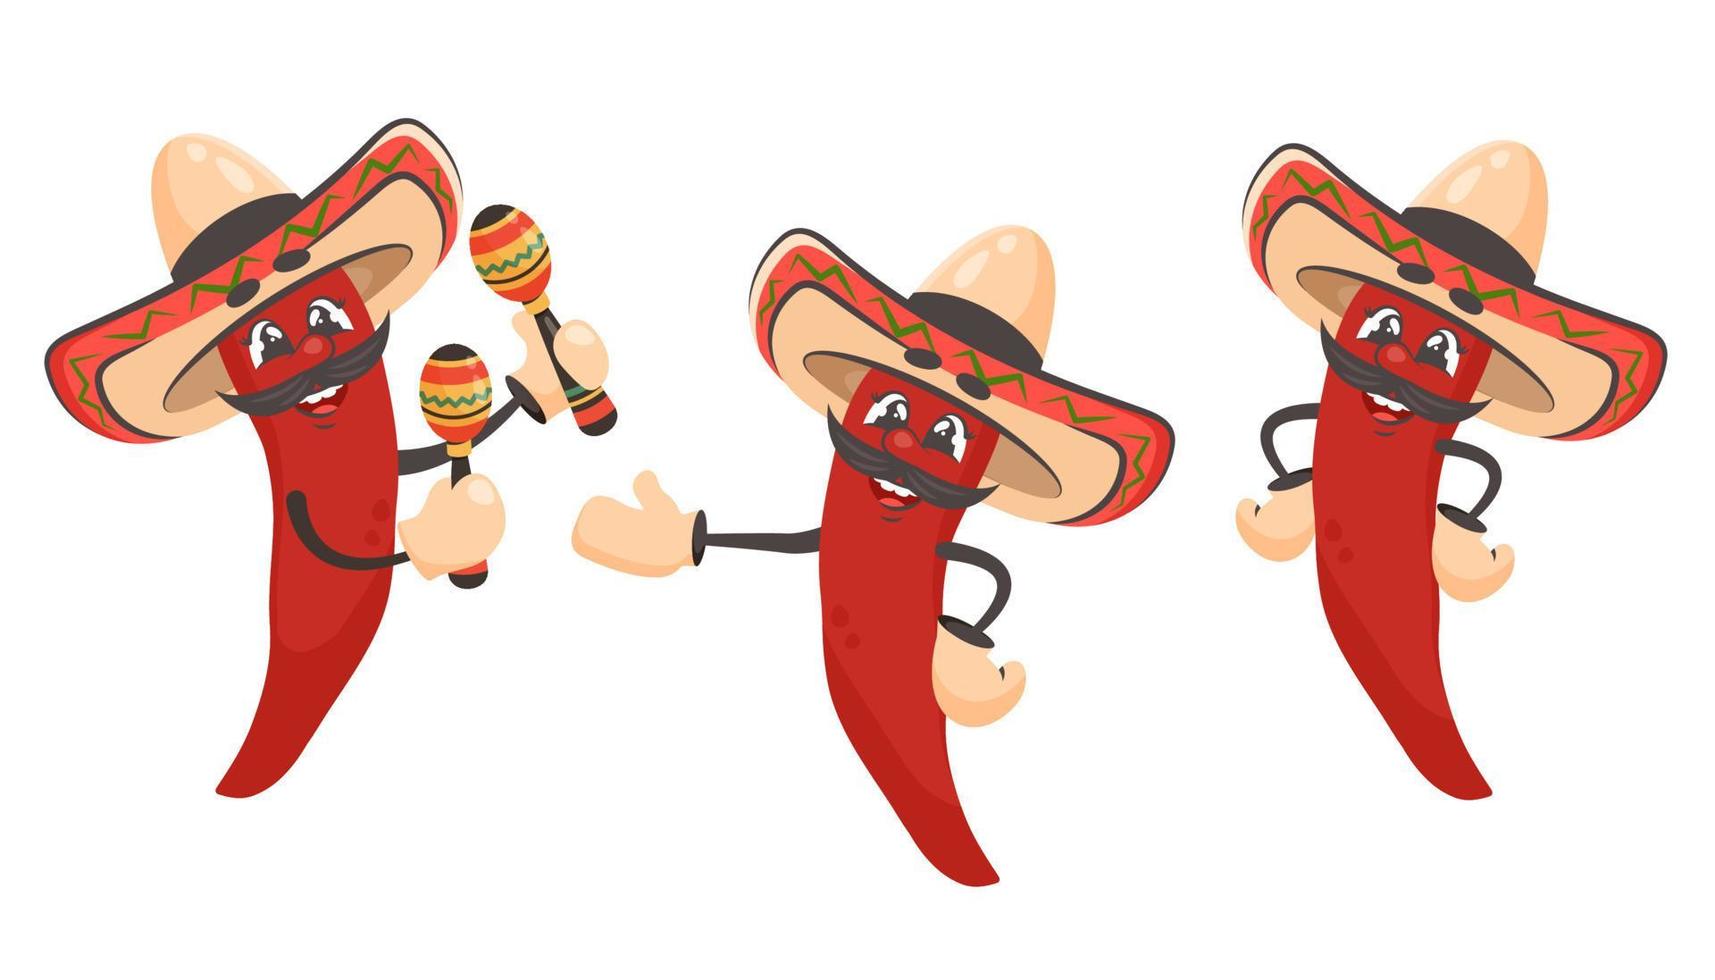 Set of red chilli pepper isolated. Cartoon character with sombrero, maracas. Mexican food. Doodle drawn vector illustration for dishes, menu, poster, flyer, banner, delivery, cooking concept